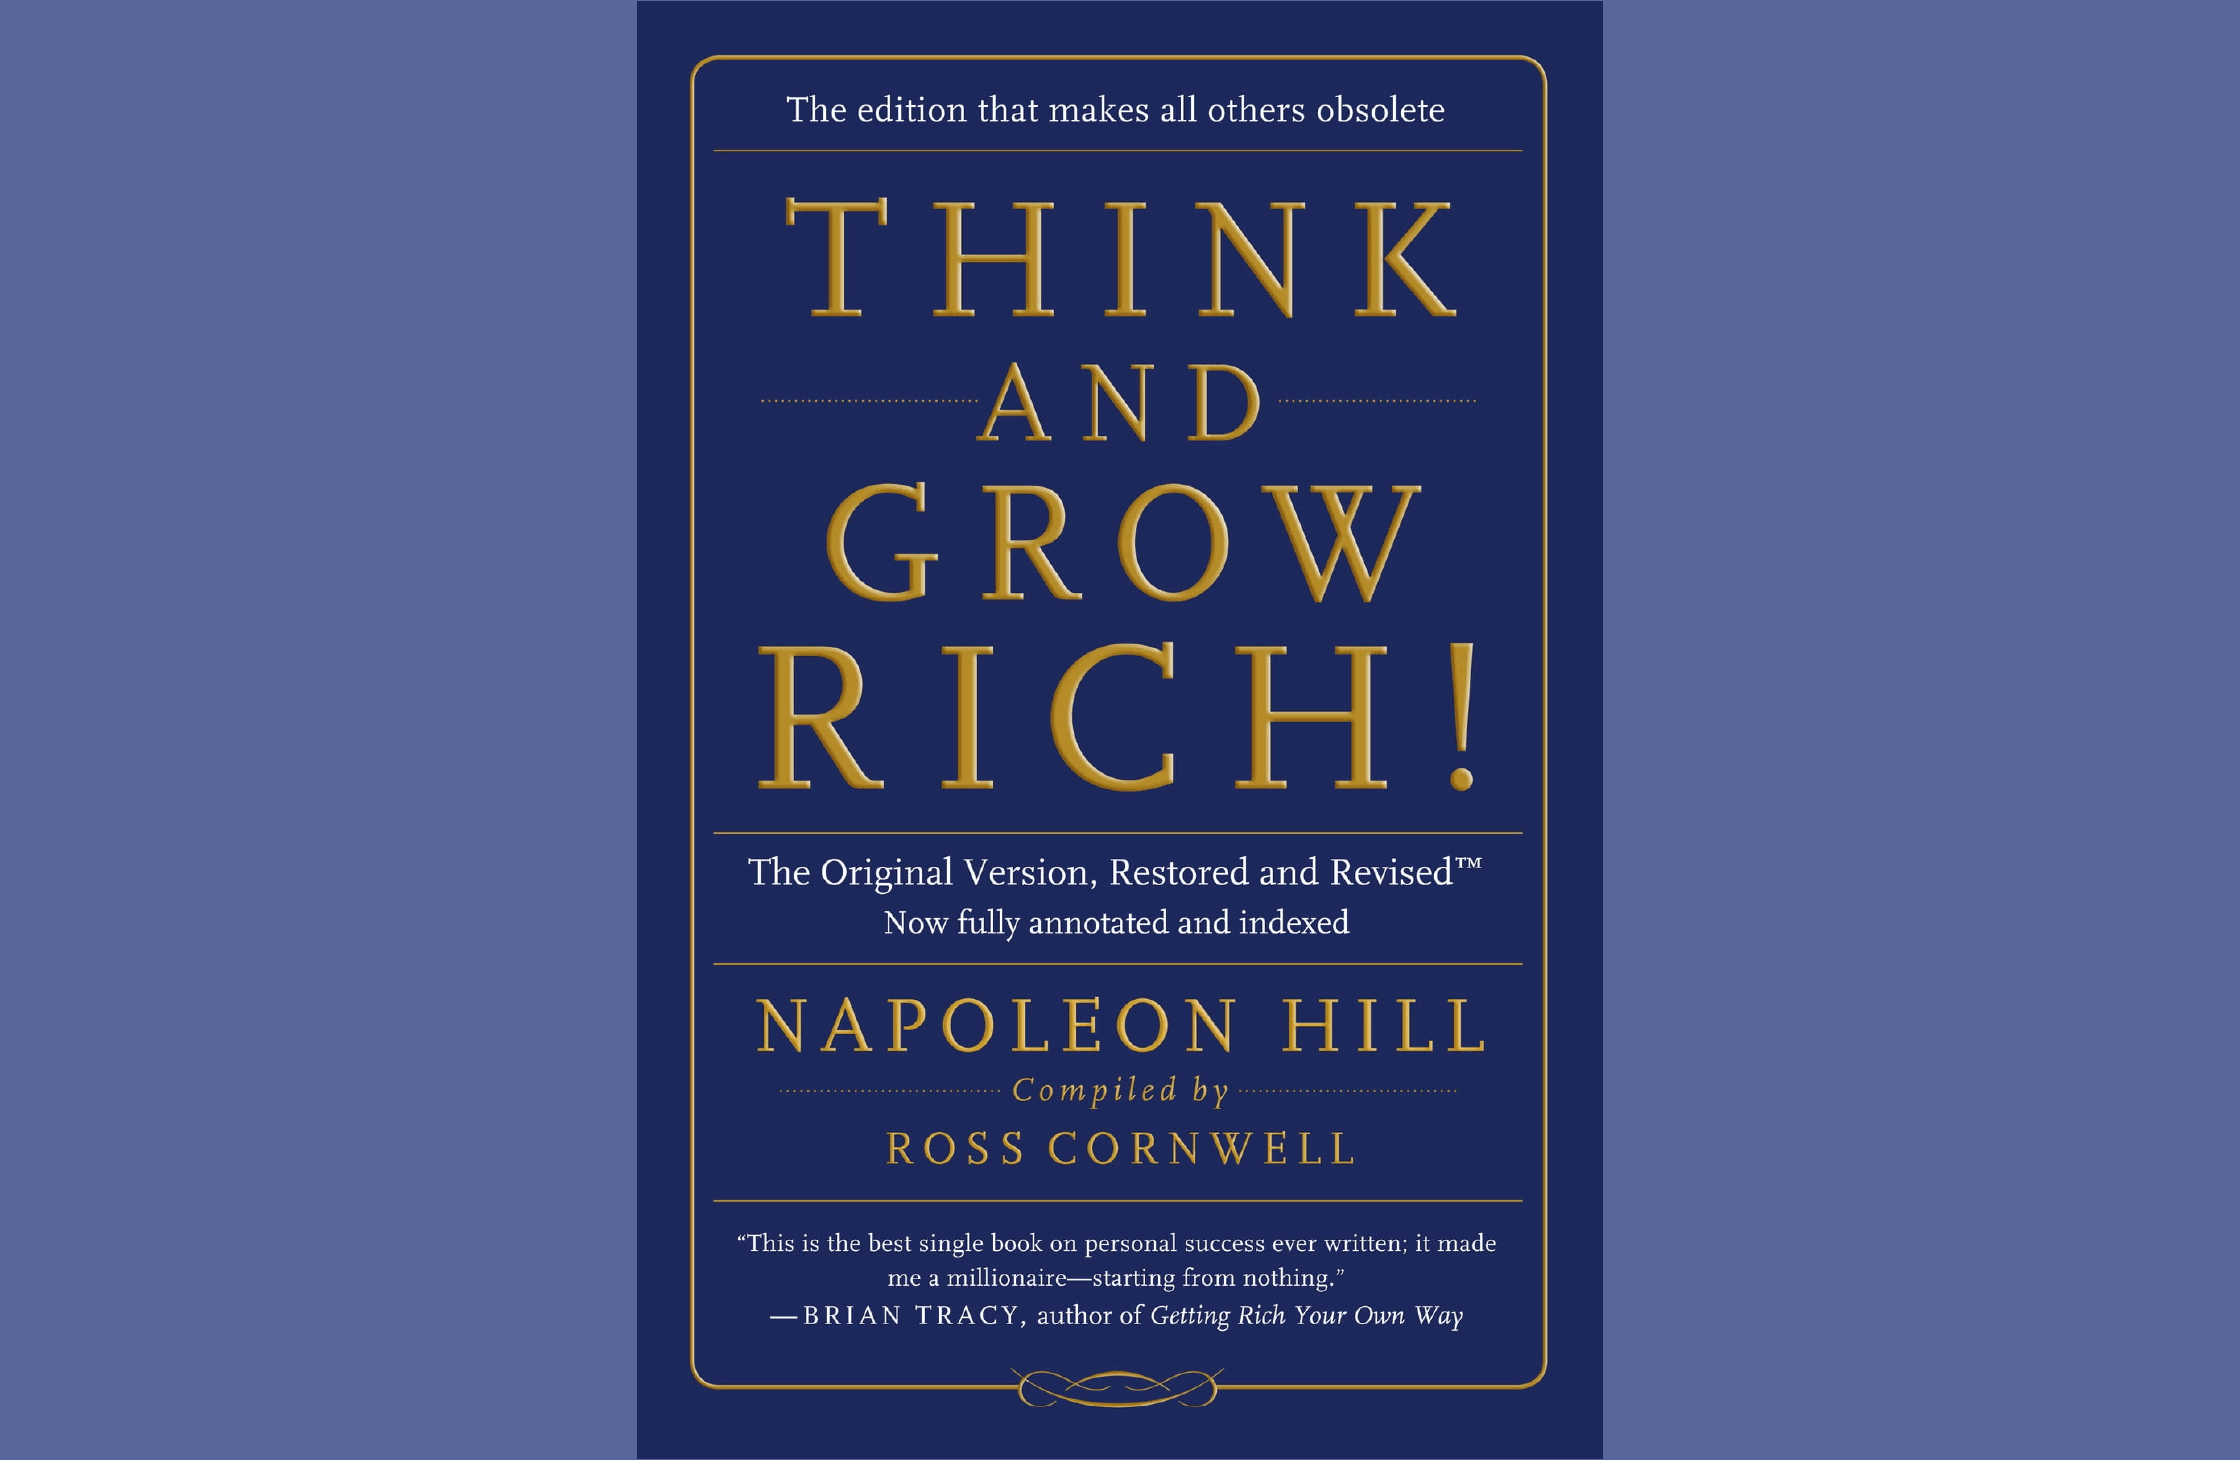 Summary: "Think and Grow Rich" by Napoleon Hill